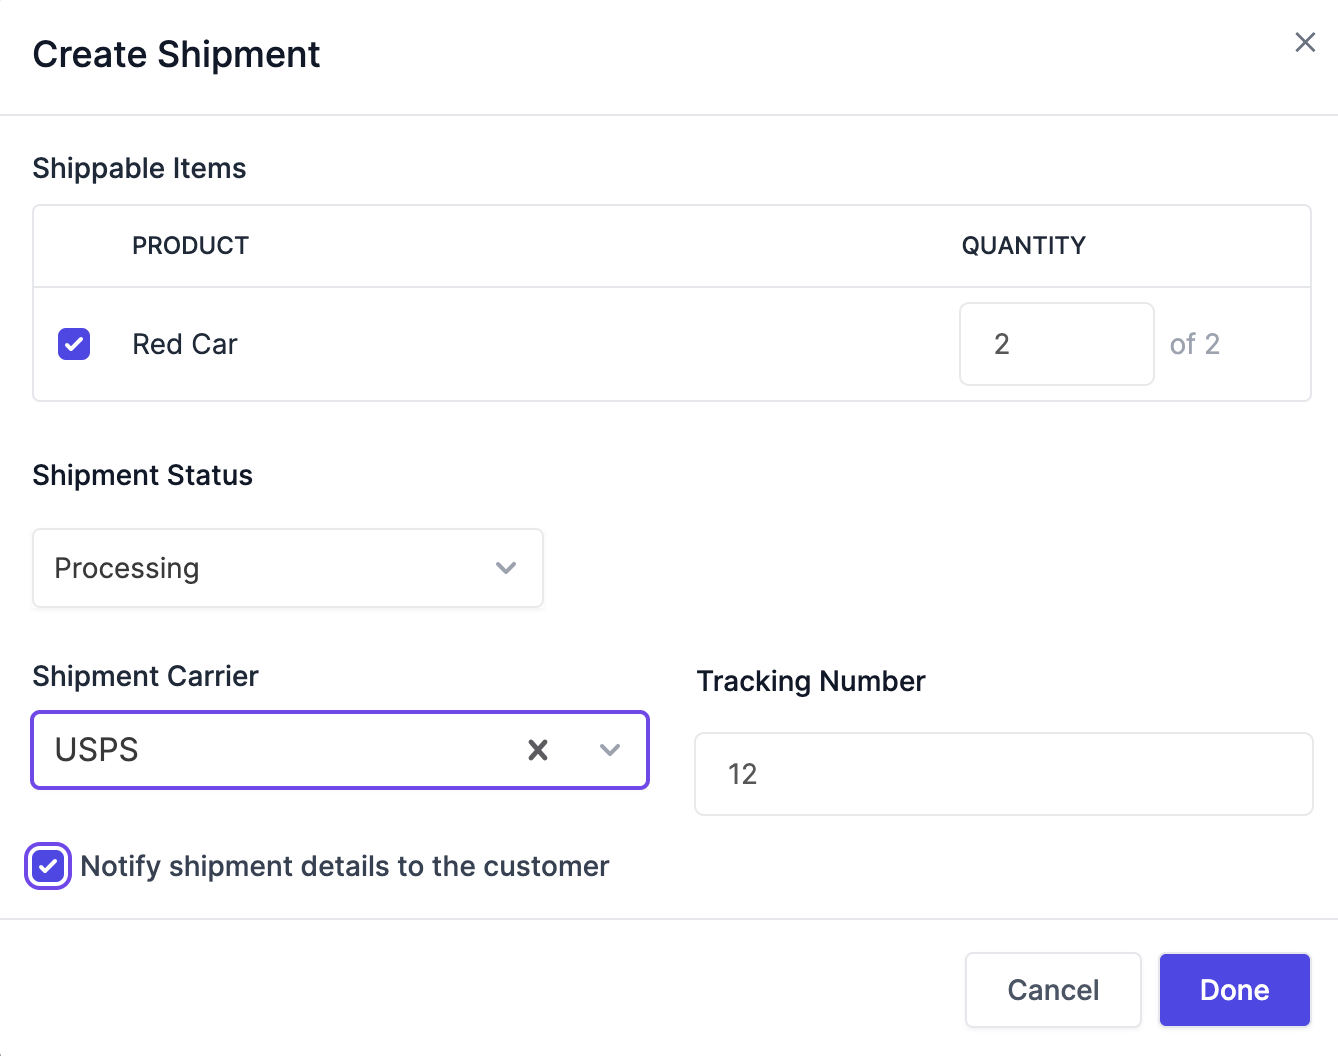 This image shows the shipment details 